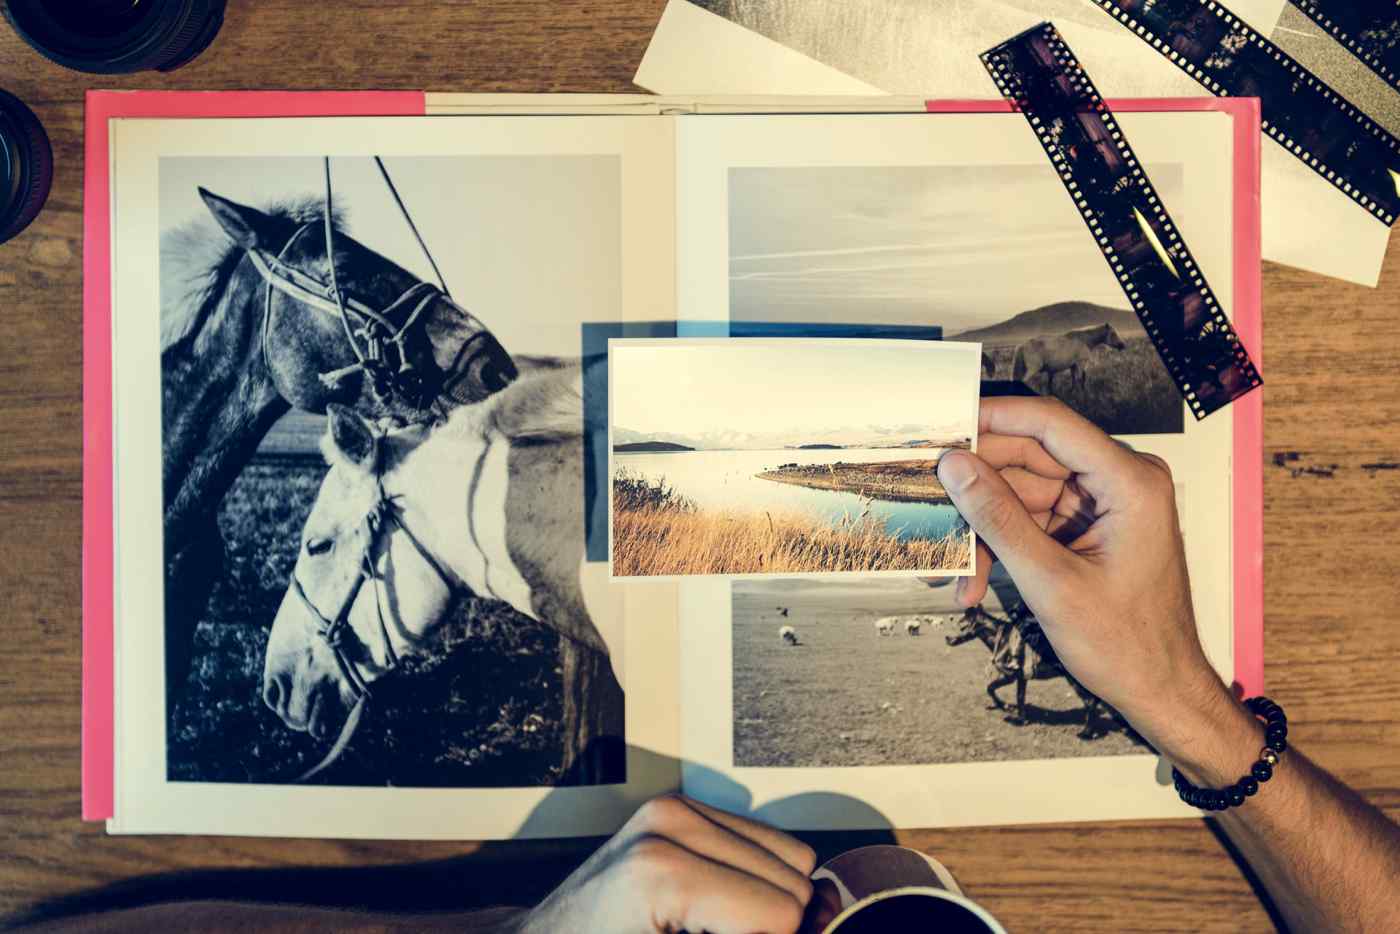 Creative gift ideas for birthdays and christmas: a self-made photo book